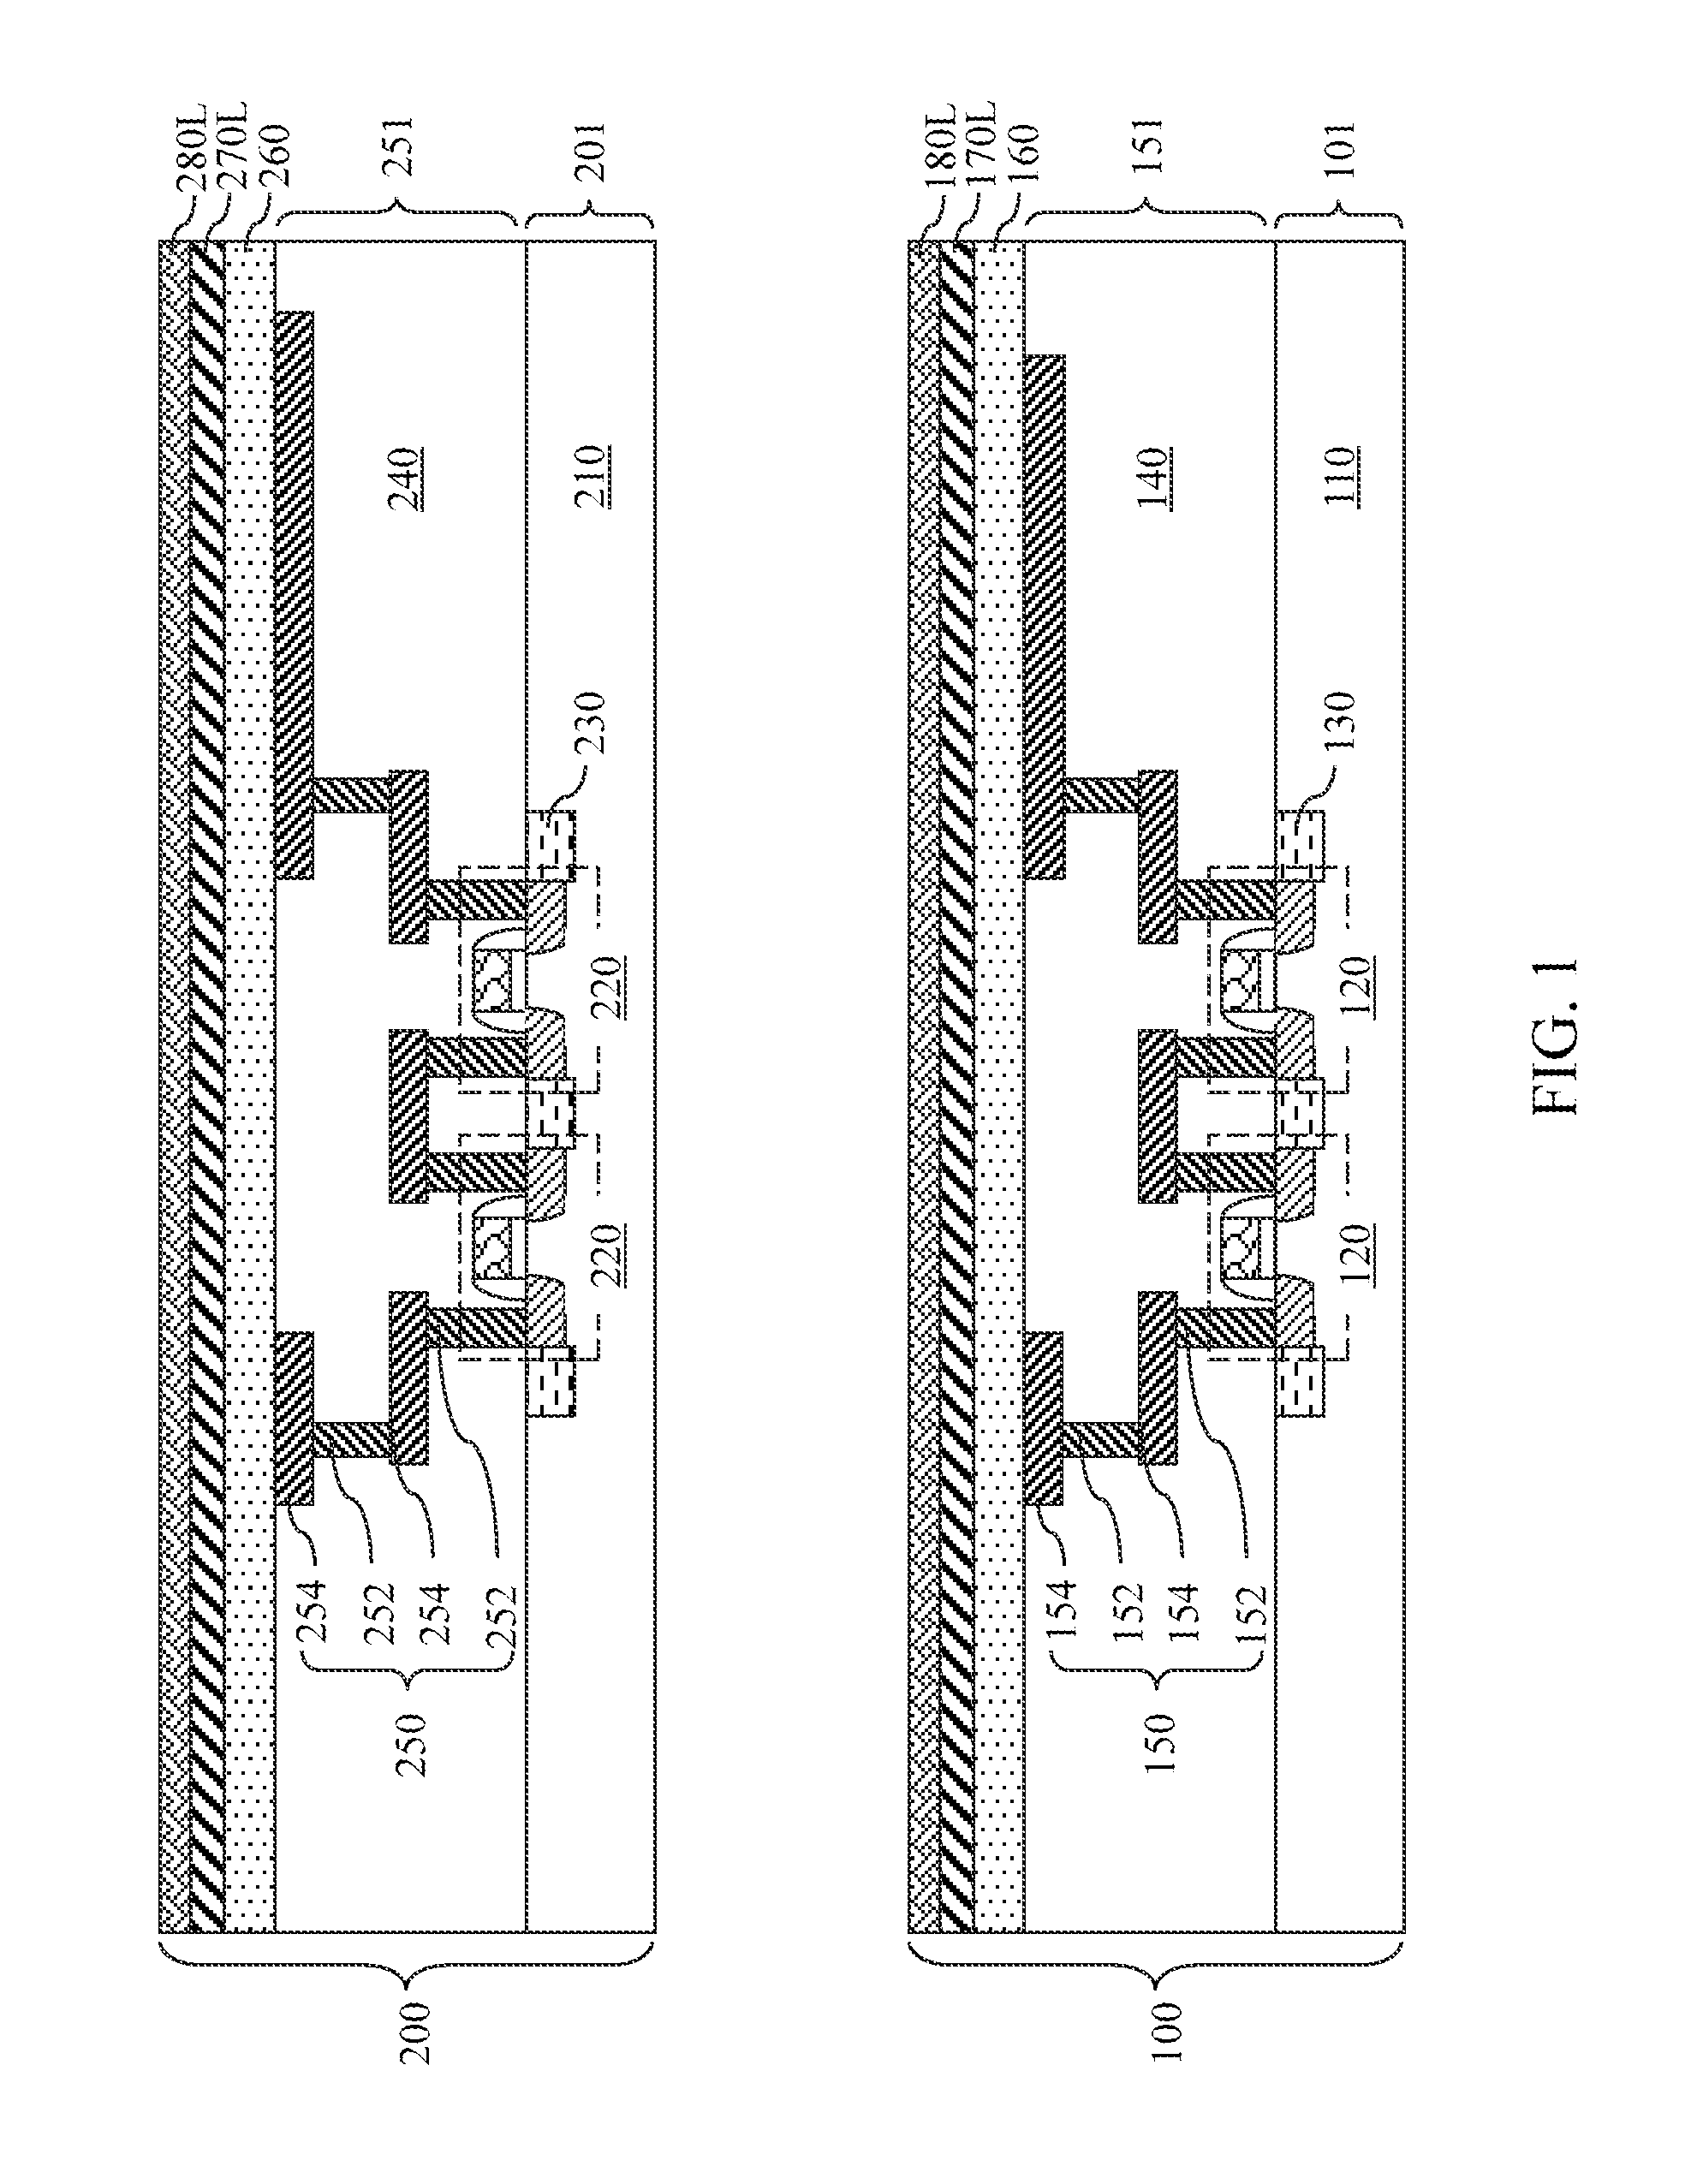 Bonded structure employing metal semiconductor alloy bonding